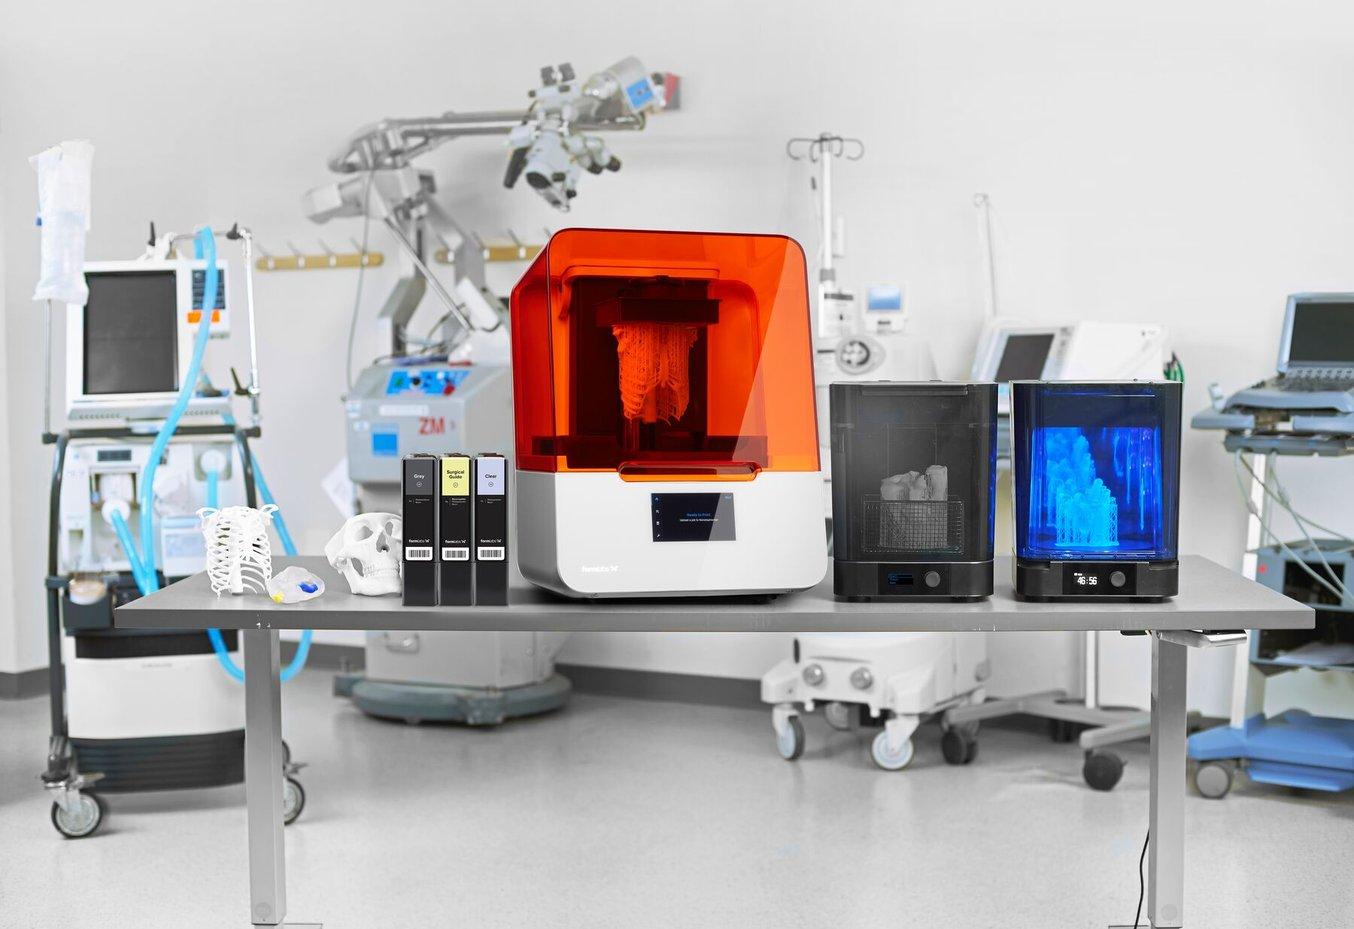 Three resin cartridges and a Form 3B printer in a medical setting